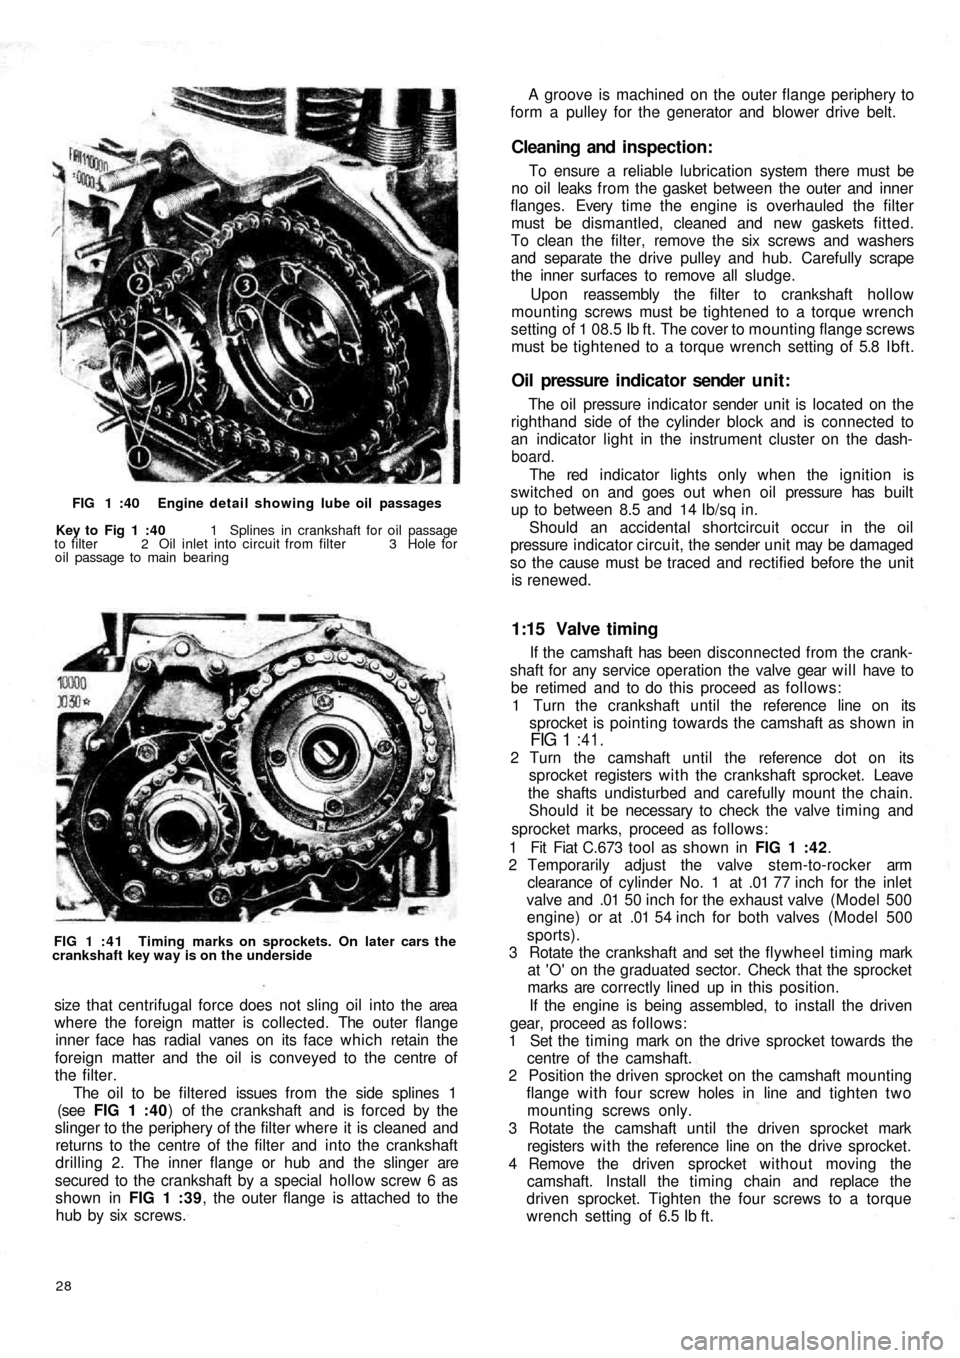 FIAT 500 1972 1.G Workshop Manual FIG 1 :40  Engine detail showing lube oil passages
Key to Fig 1 :40  1  Splines in crankshaft for oil passage
to filter  2  Oil inlet into circuit from filter 3 Hole for
oil passage to main bearing
FI